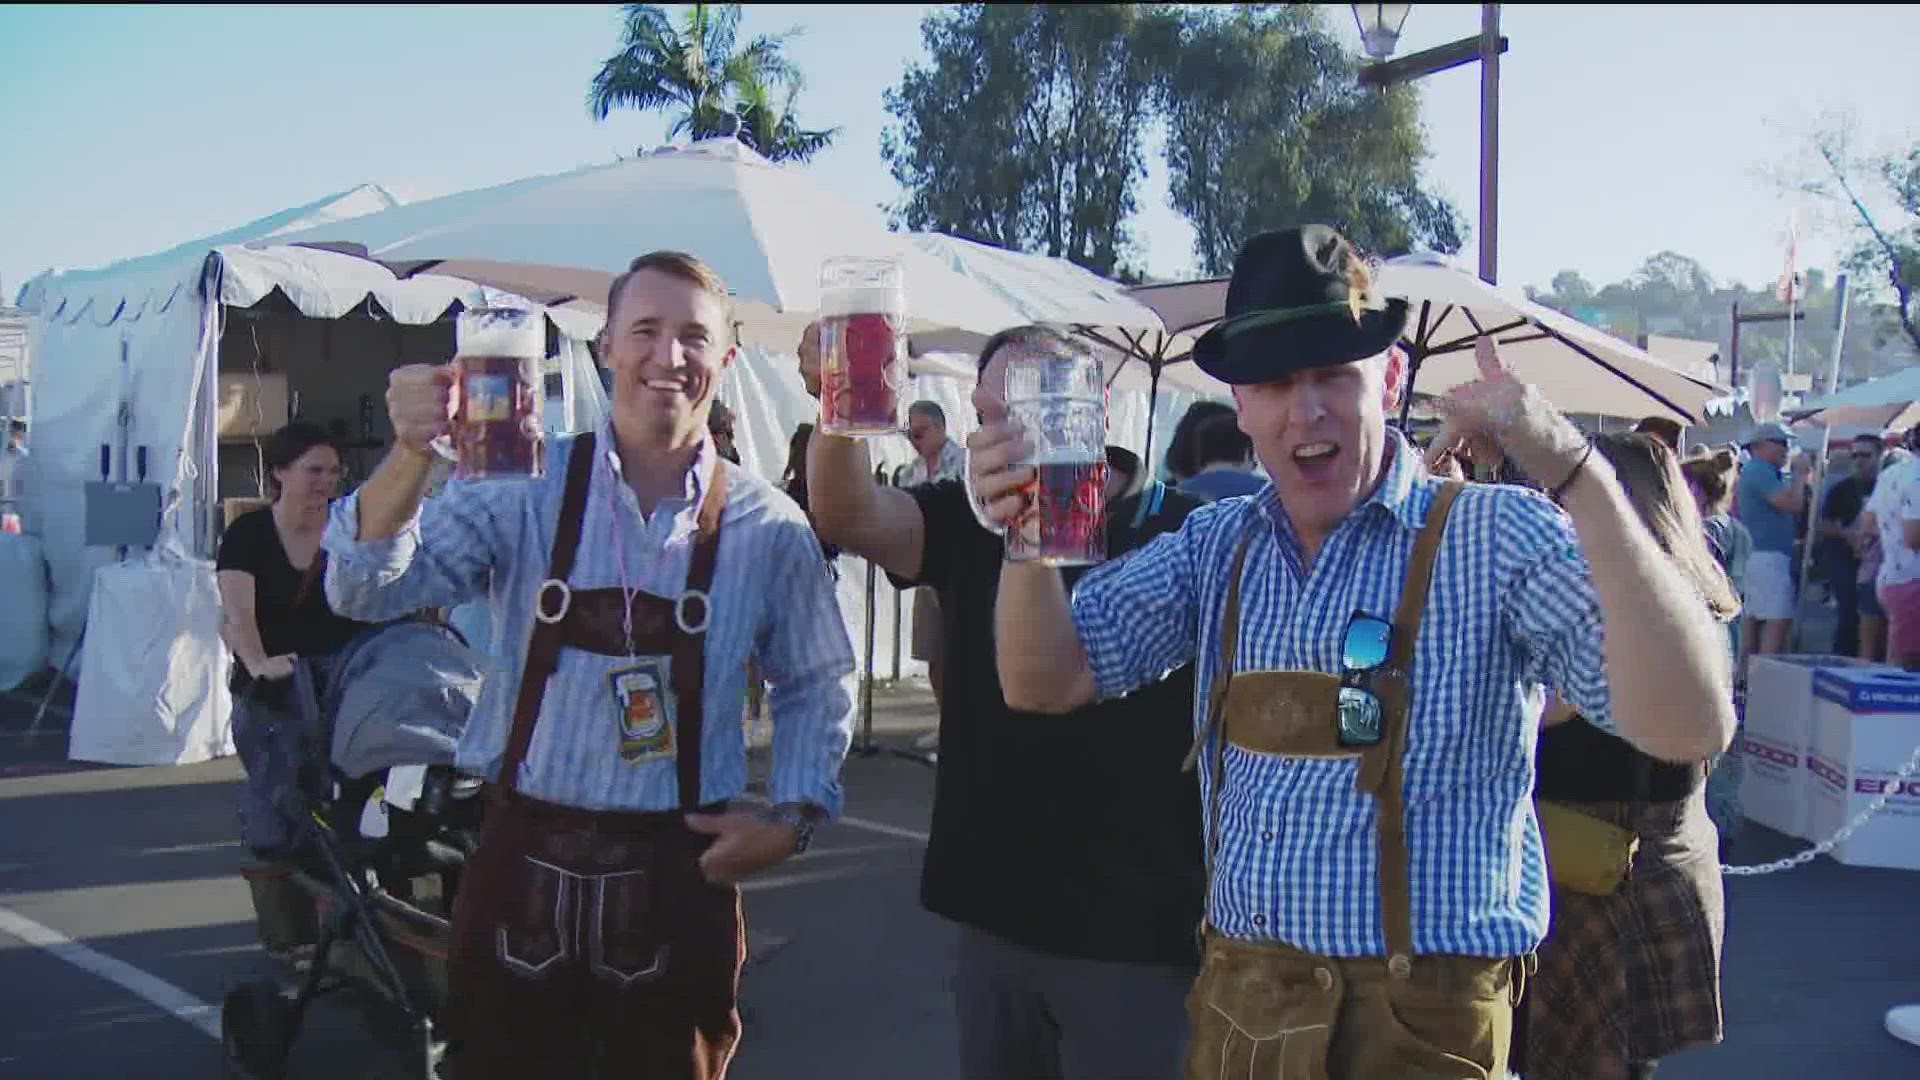 Thousands will head to La Mesa for a weekend filled with beer, bratwurst, music and the chicken dance. It's free and you can celebrate Oktoberfest all weekend long.